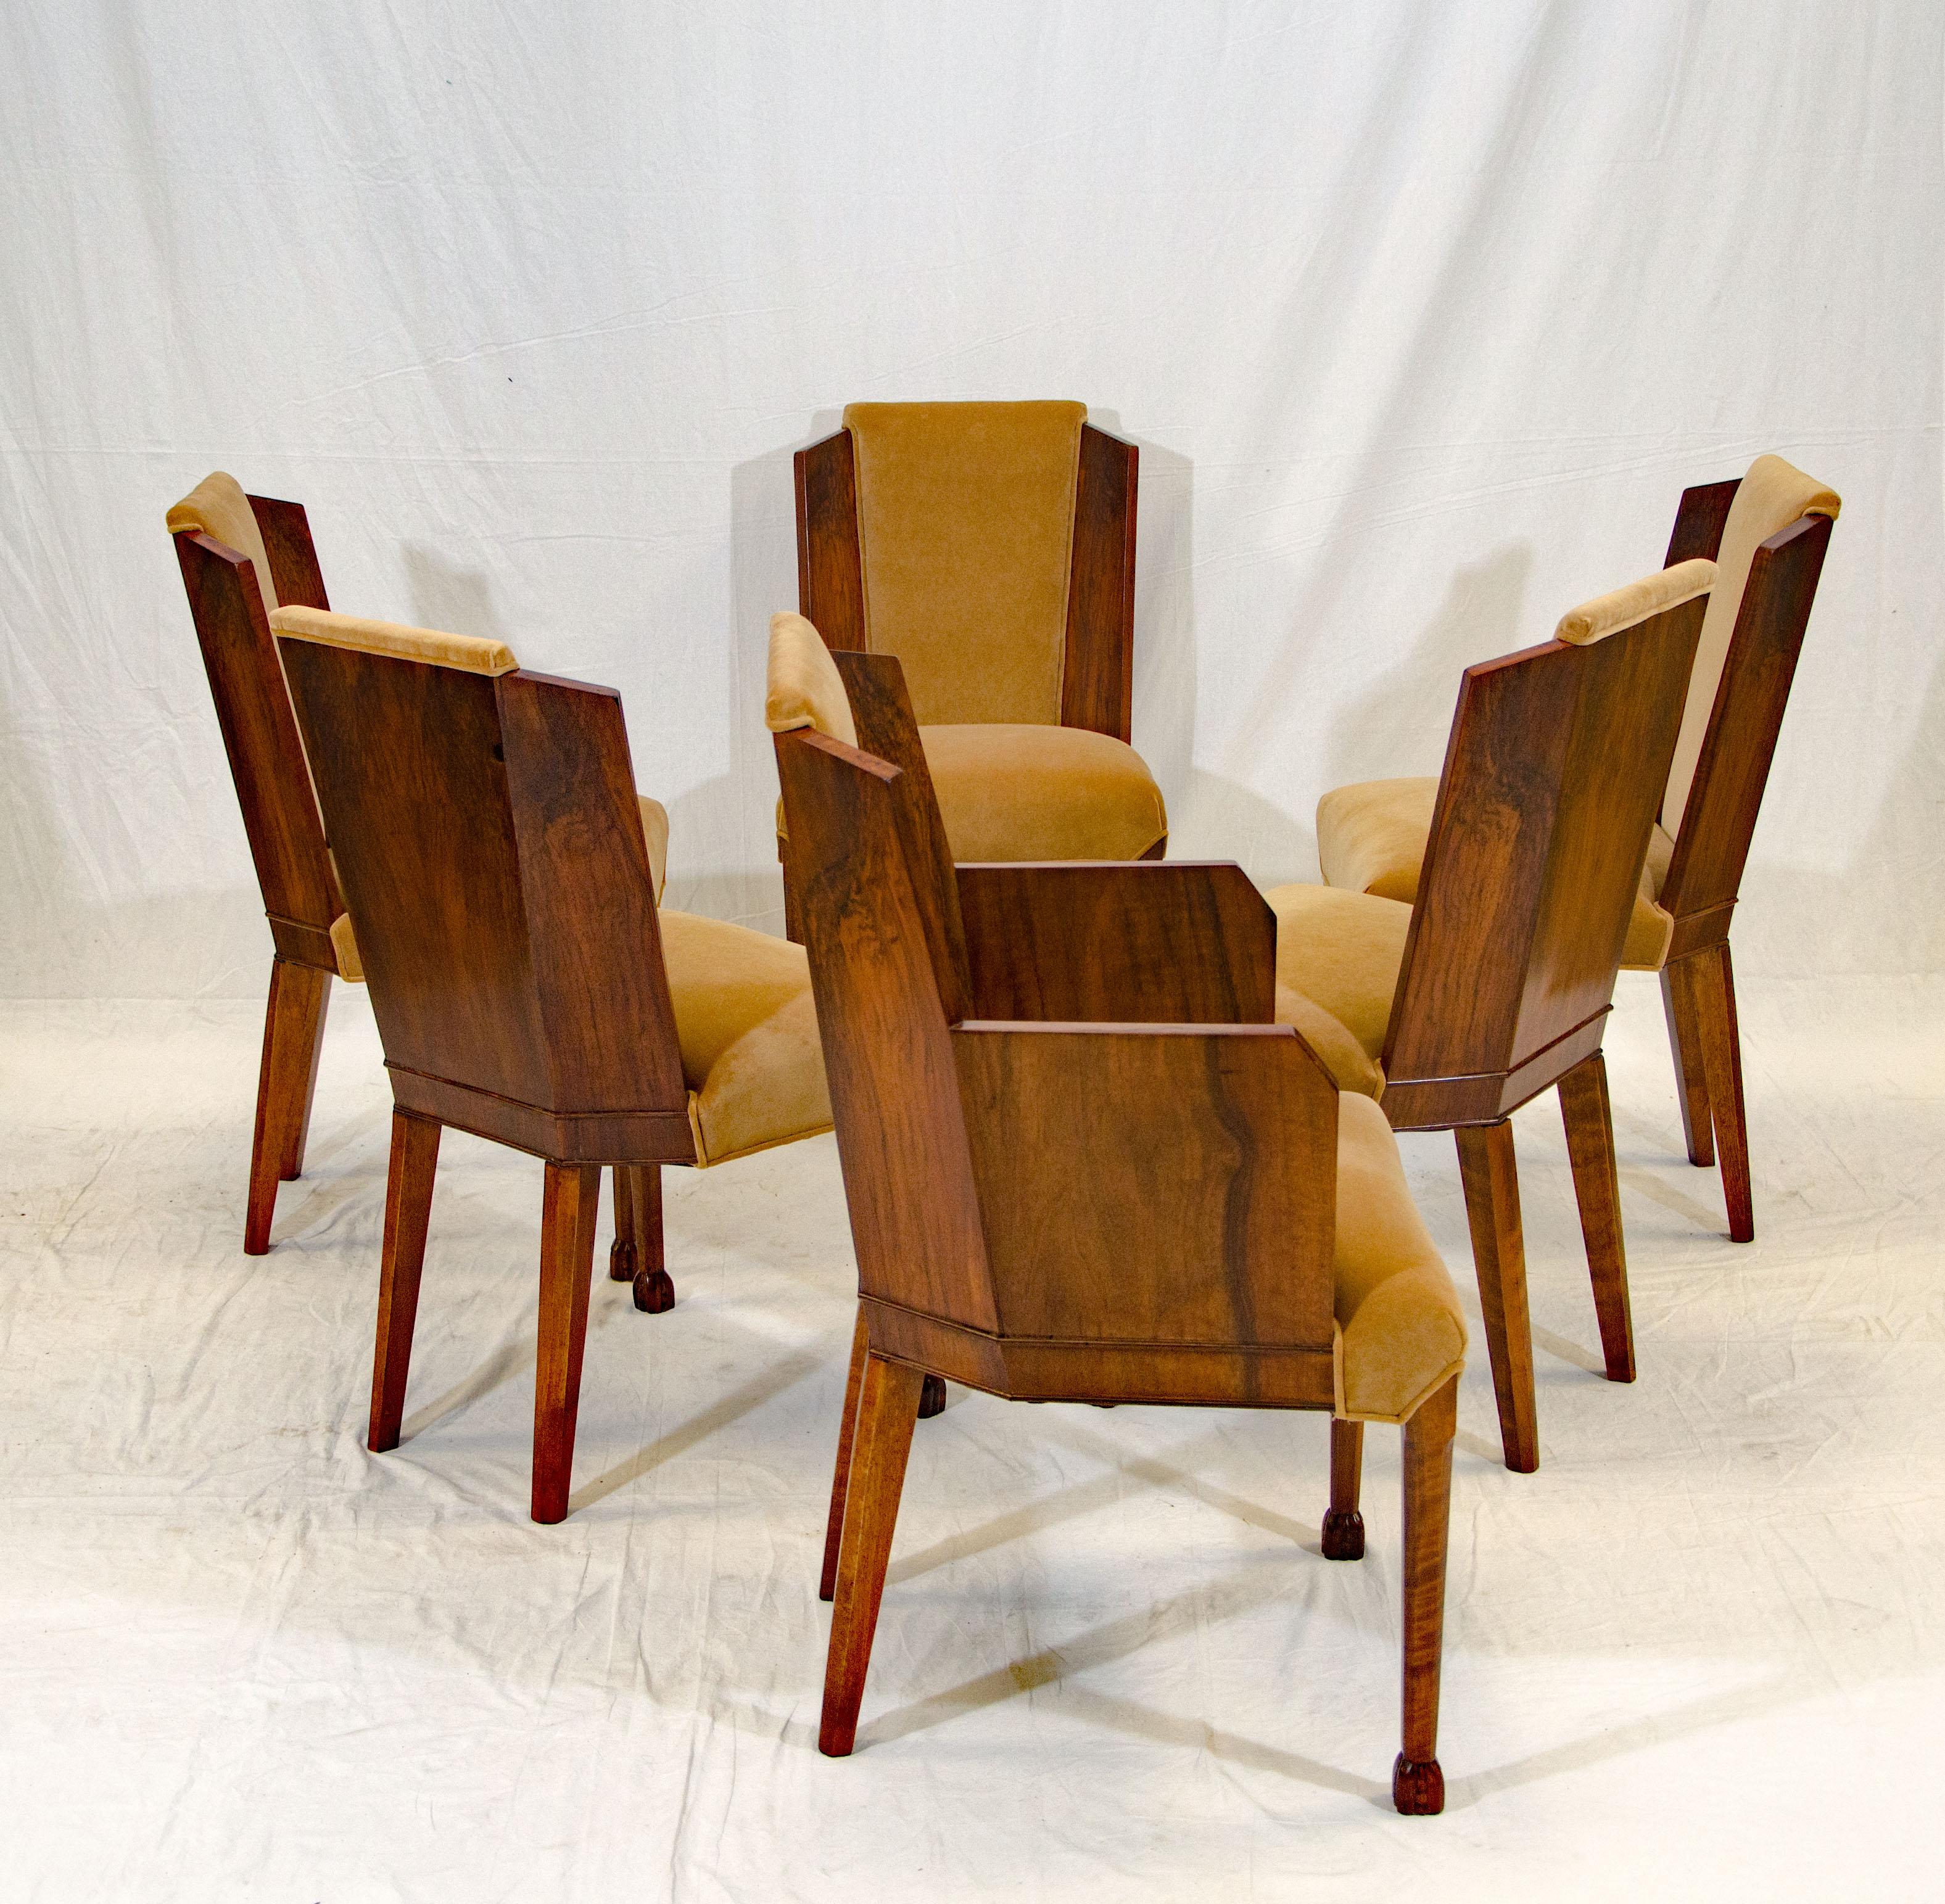 Set of Six Burl Walnut French Art Deco Dining Chairs In Good Condition For Sale In Crockett, CA